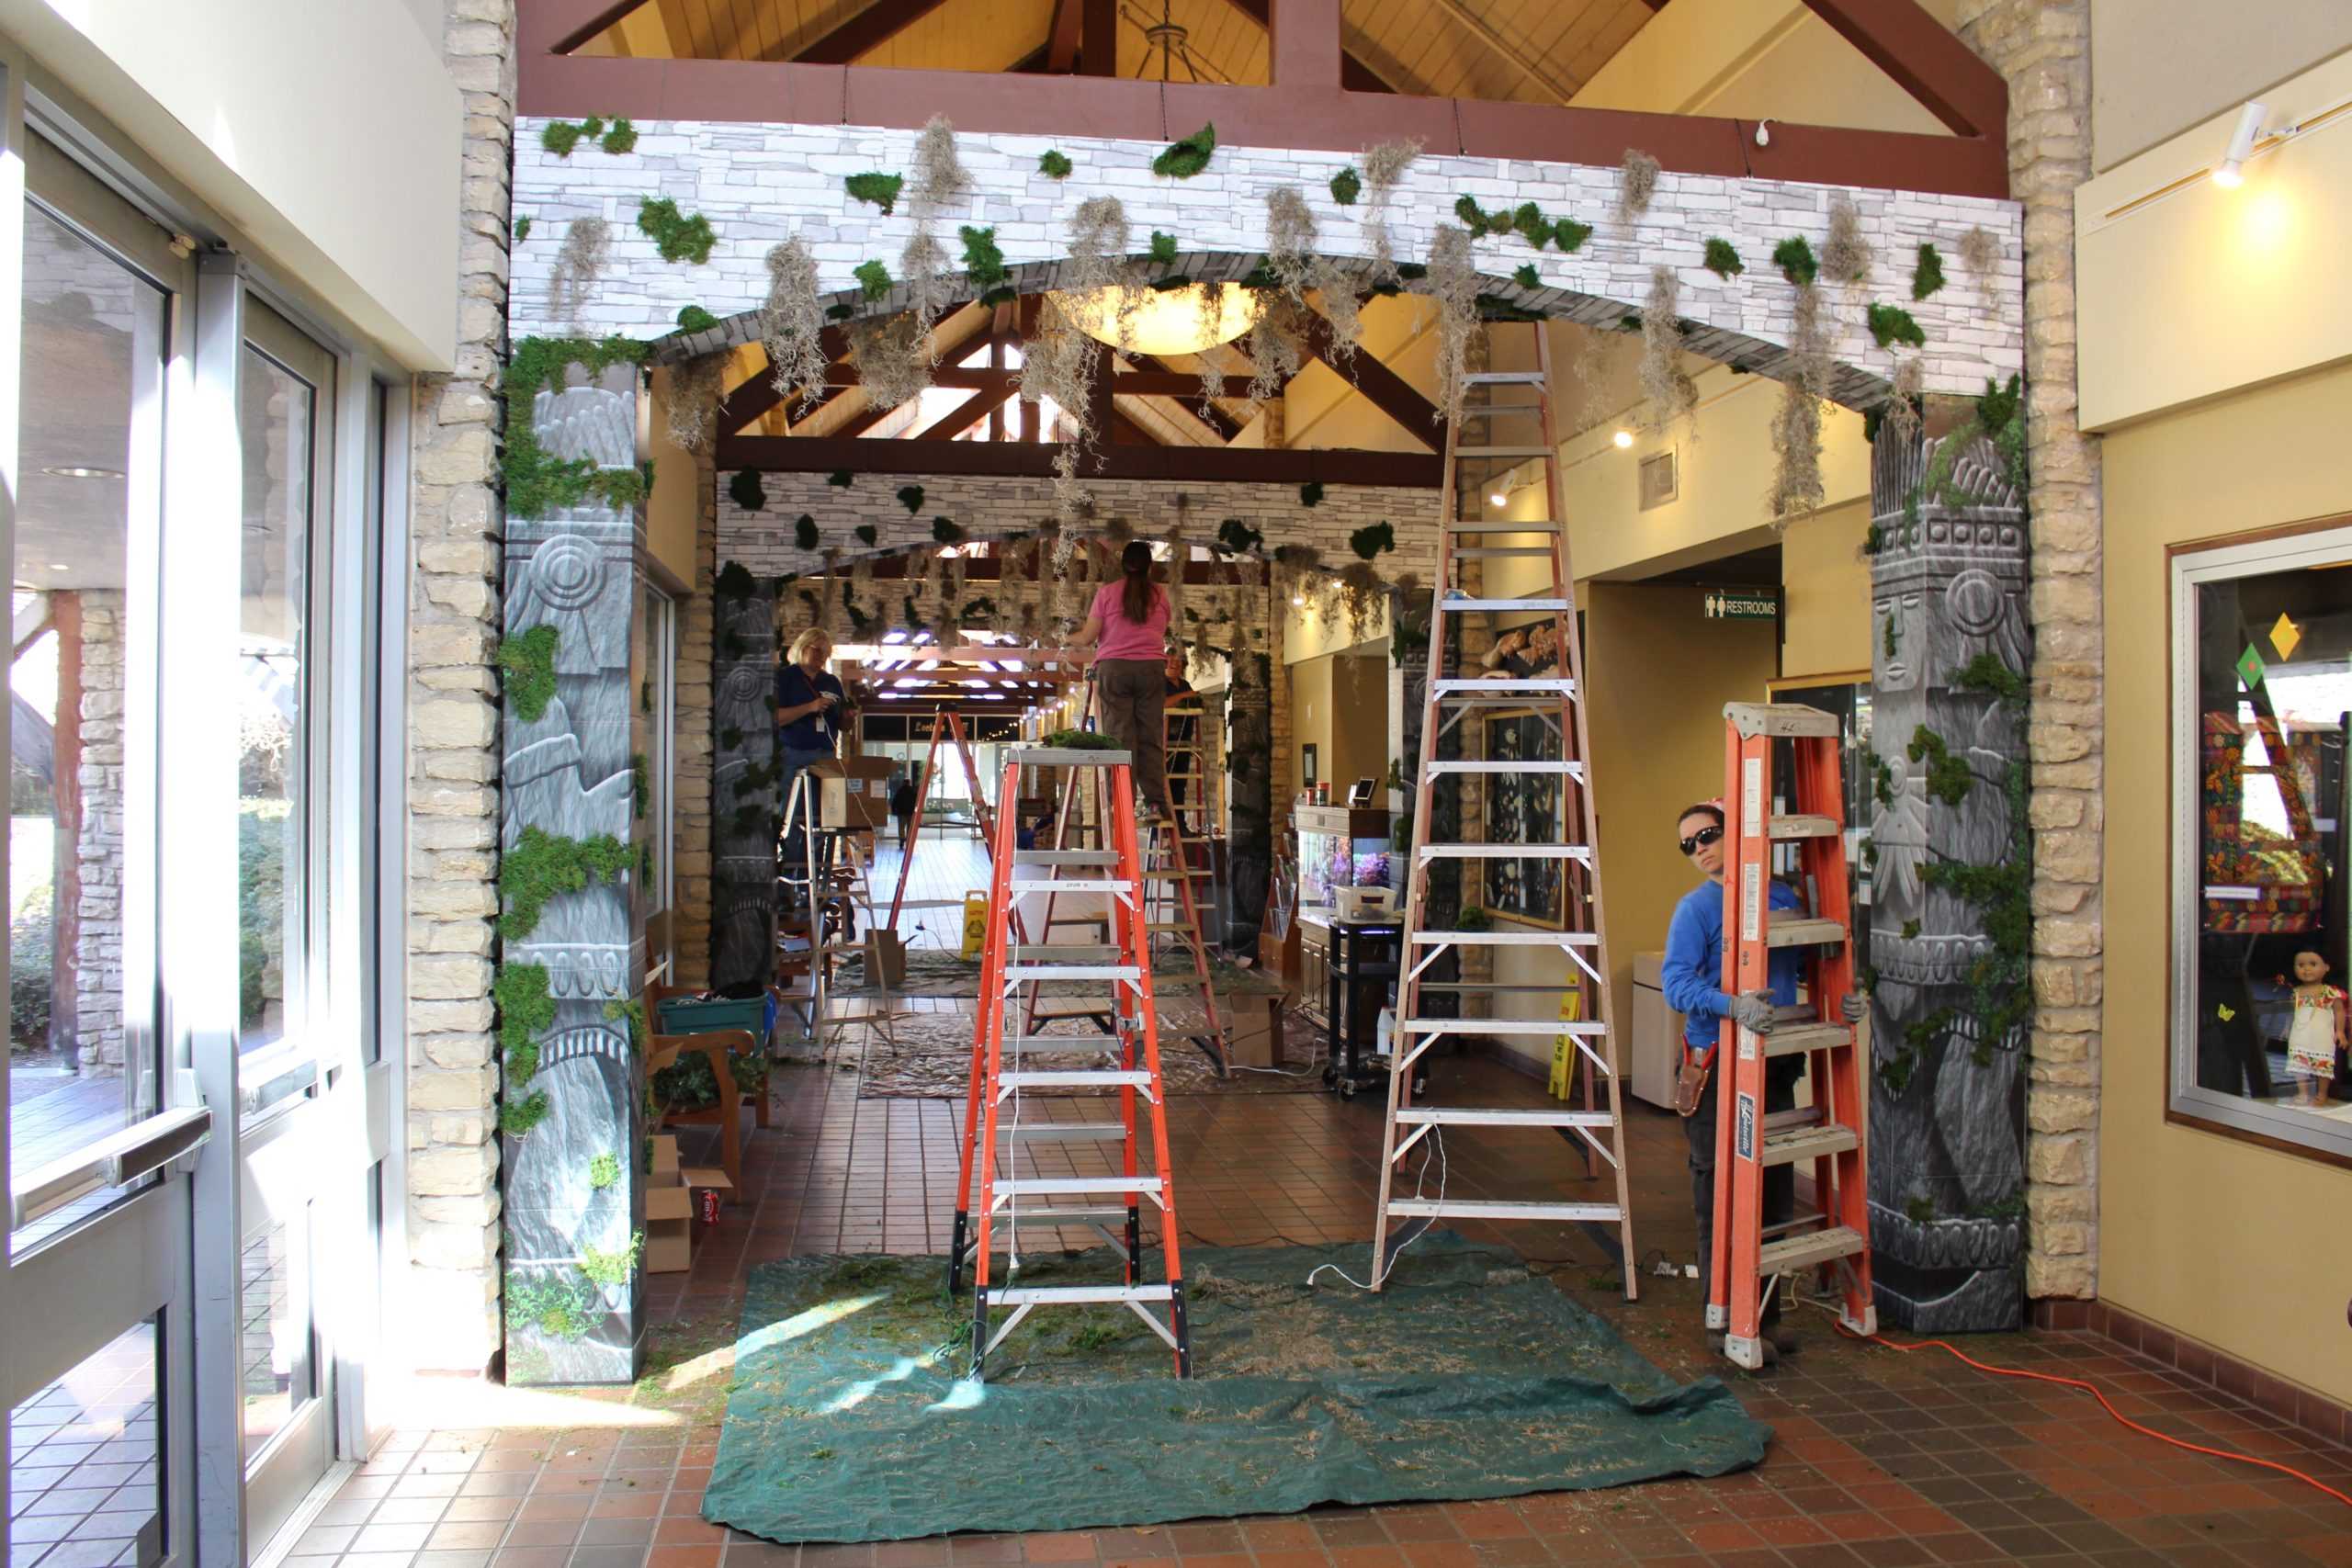 Workers preparing the Garden Center for the Butterfly exhibit.